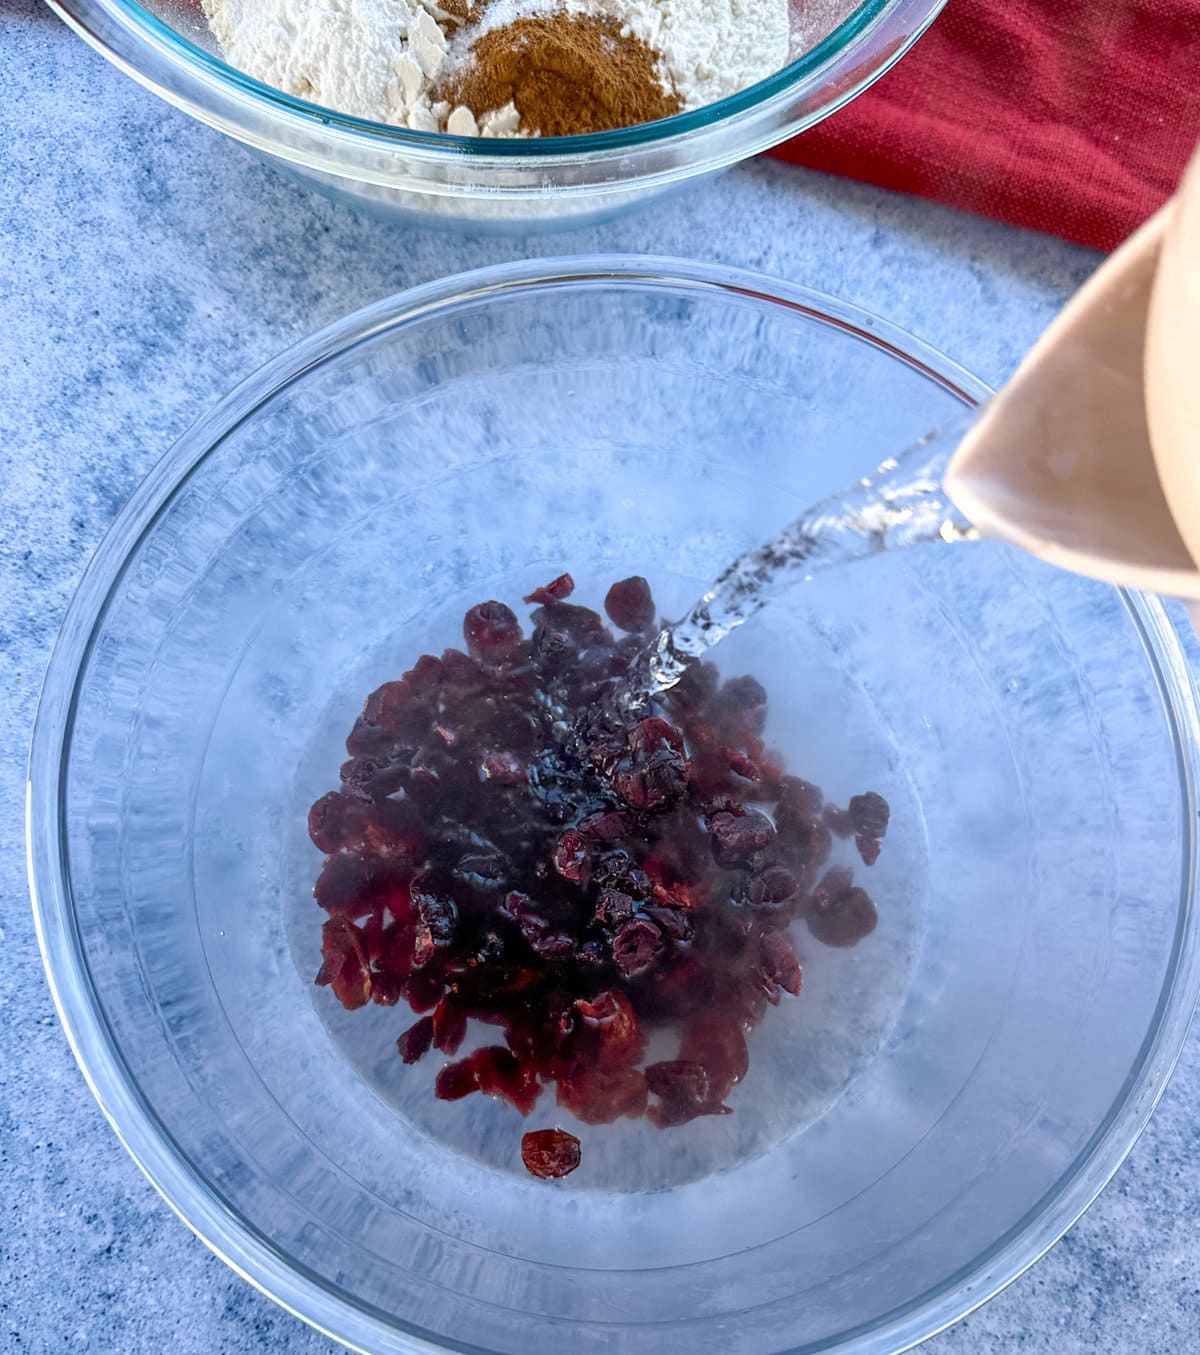 Pouring boiling water over the dried cranberries to soften them before baking